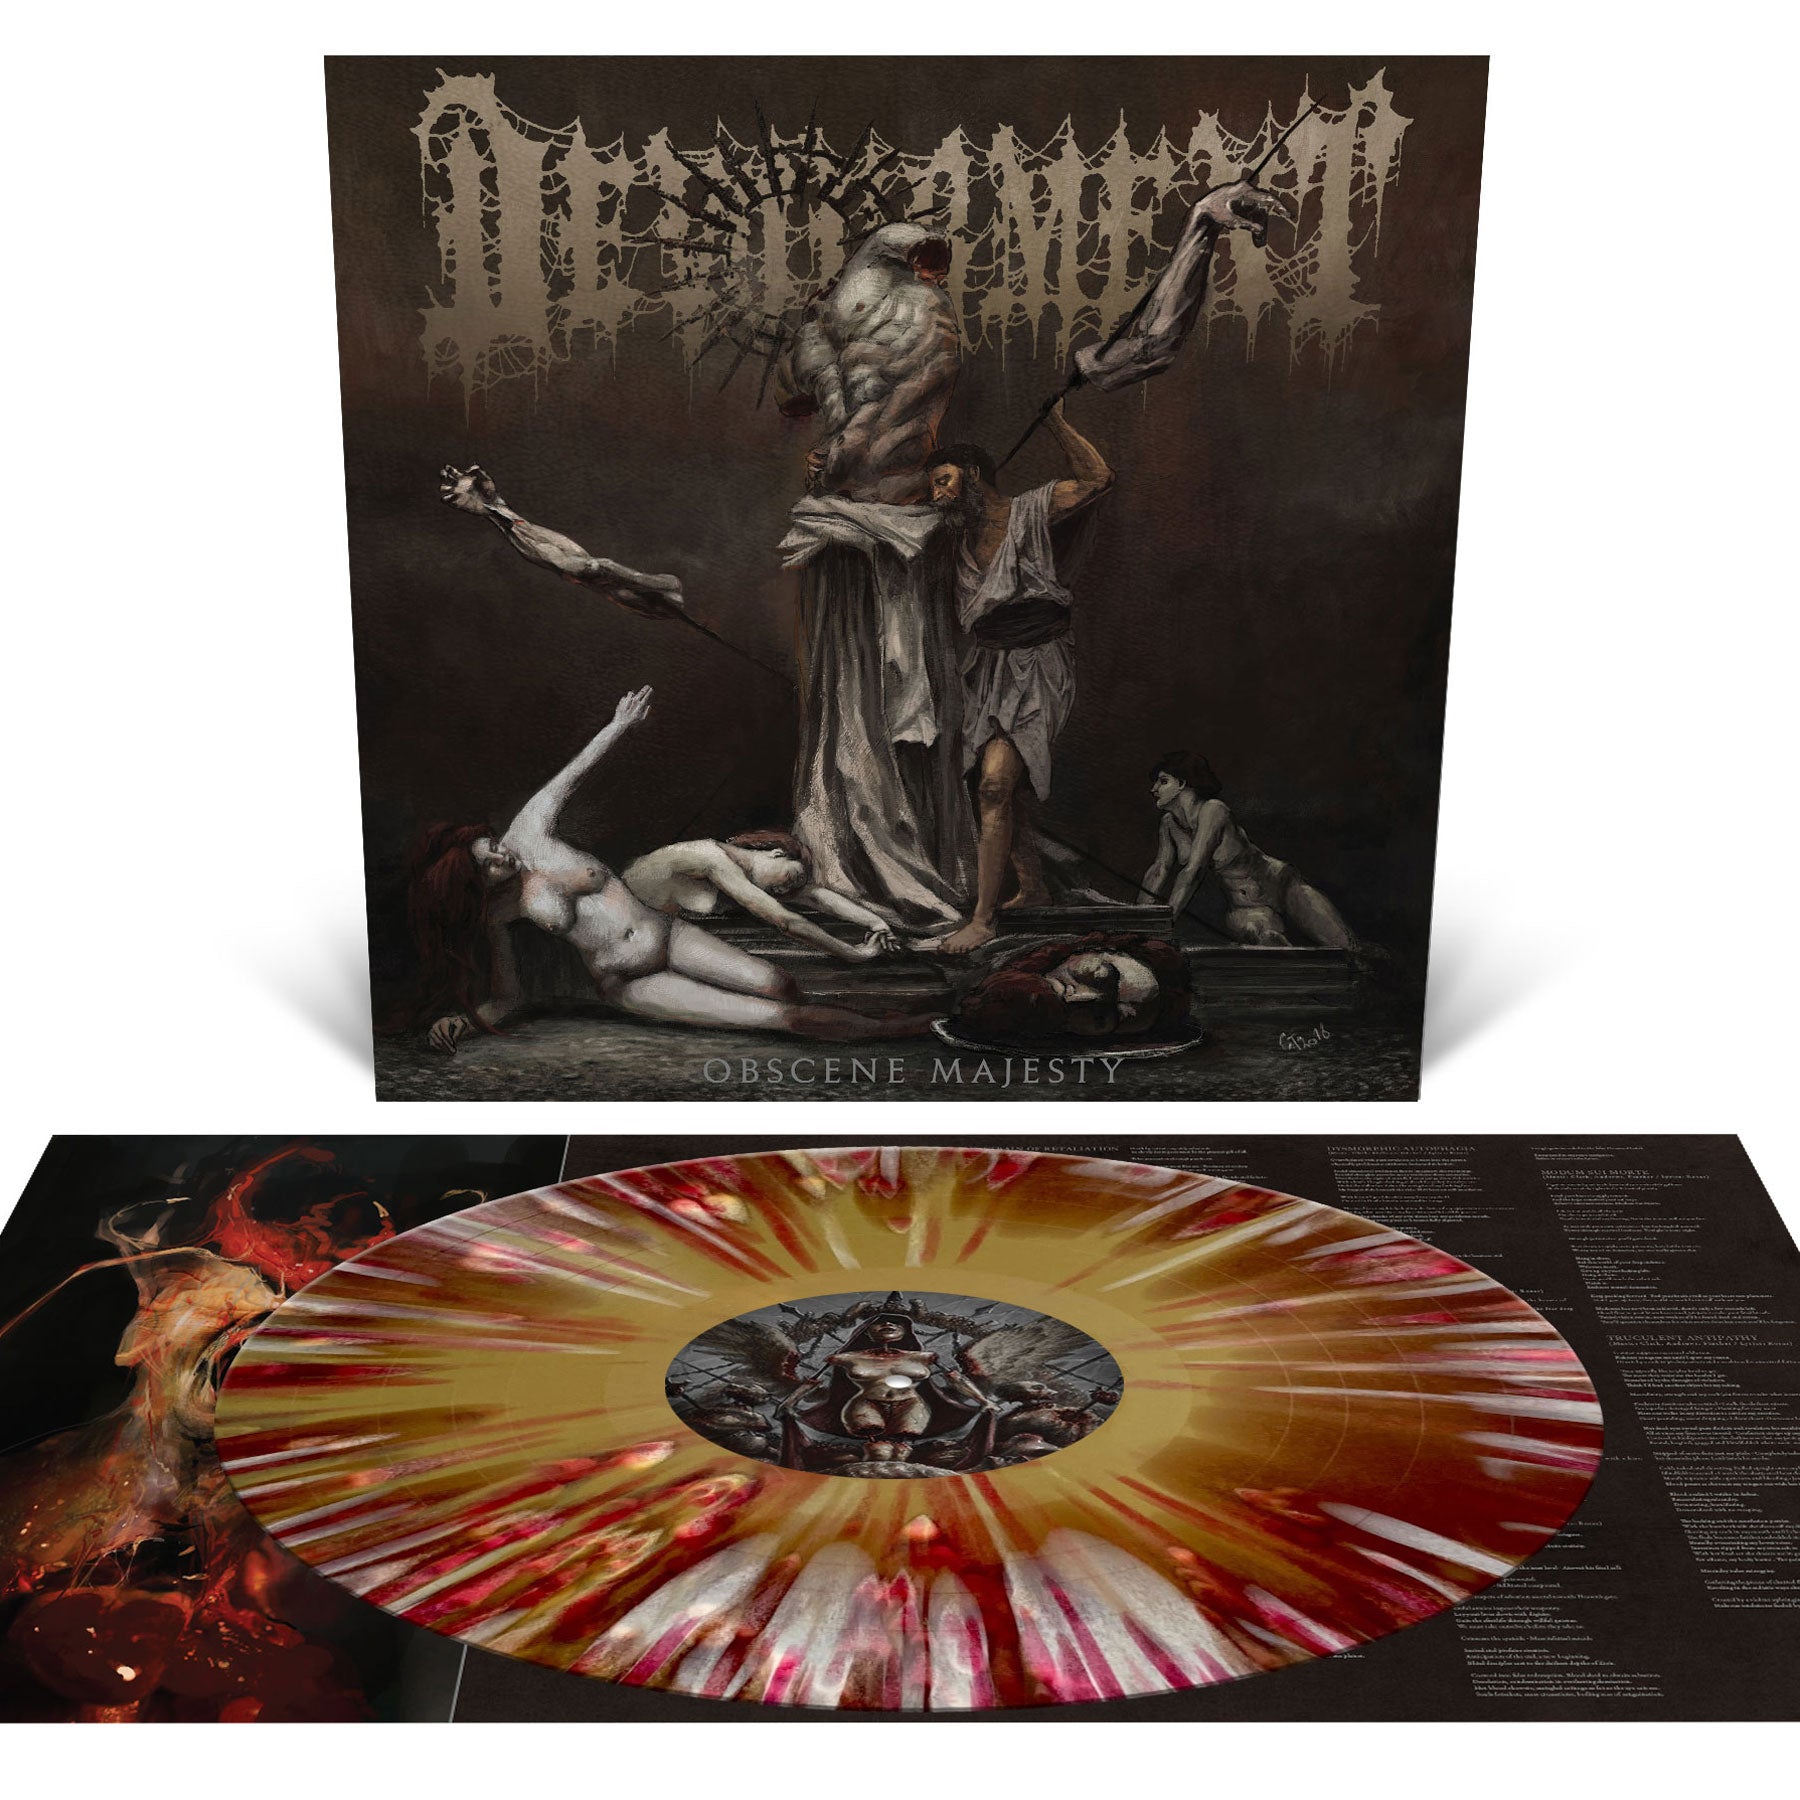 Cloakroom Dissolution Wave 12 – Relapse Records Official Store